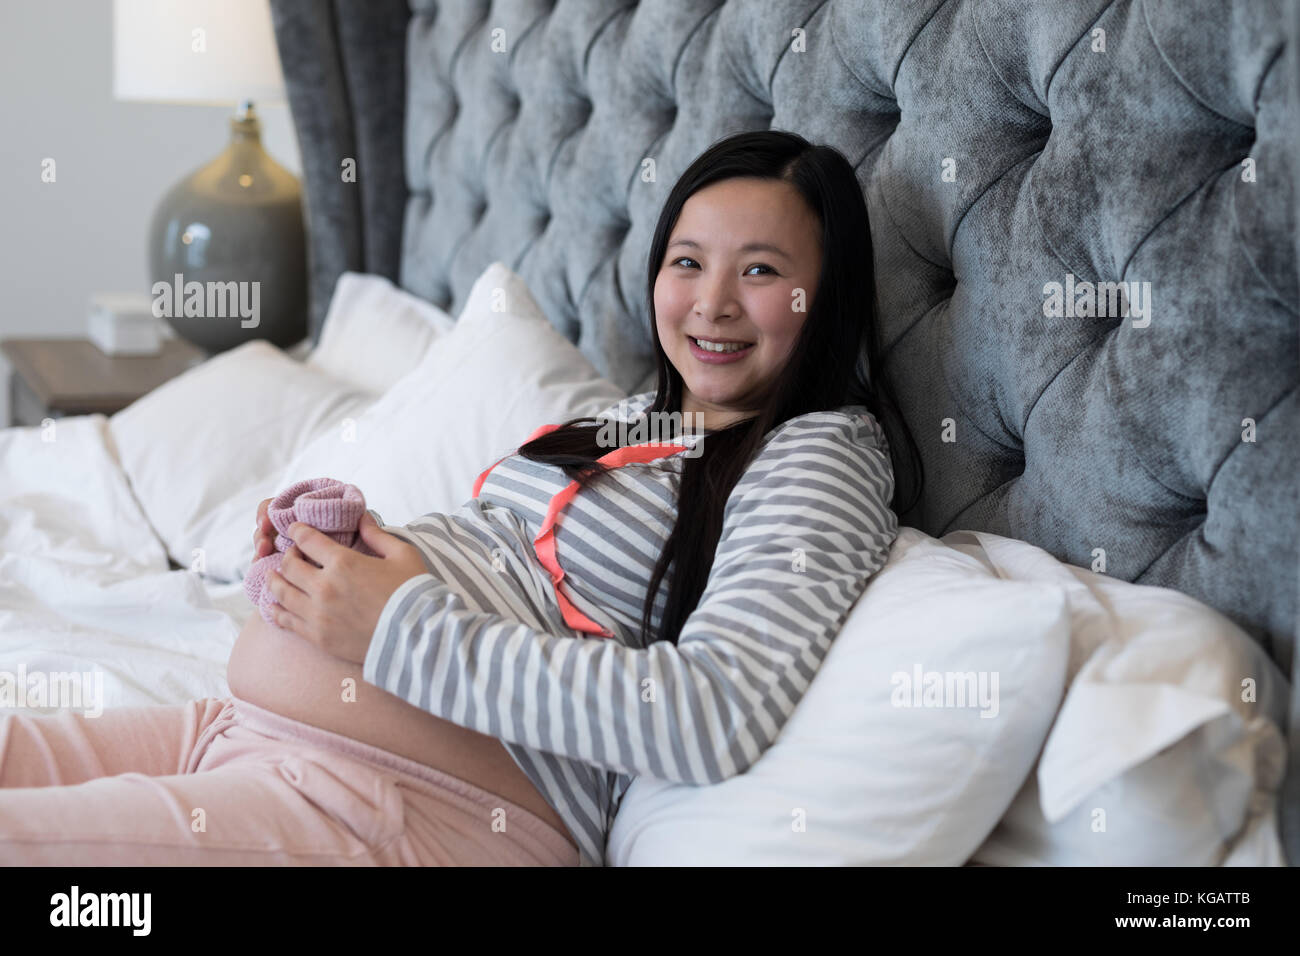 Portrait of pregnant woman looking at holding socks in bedroom Stock Photo